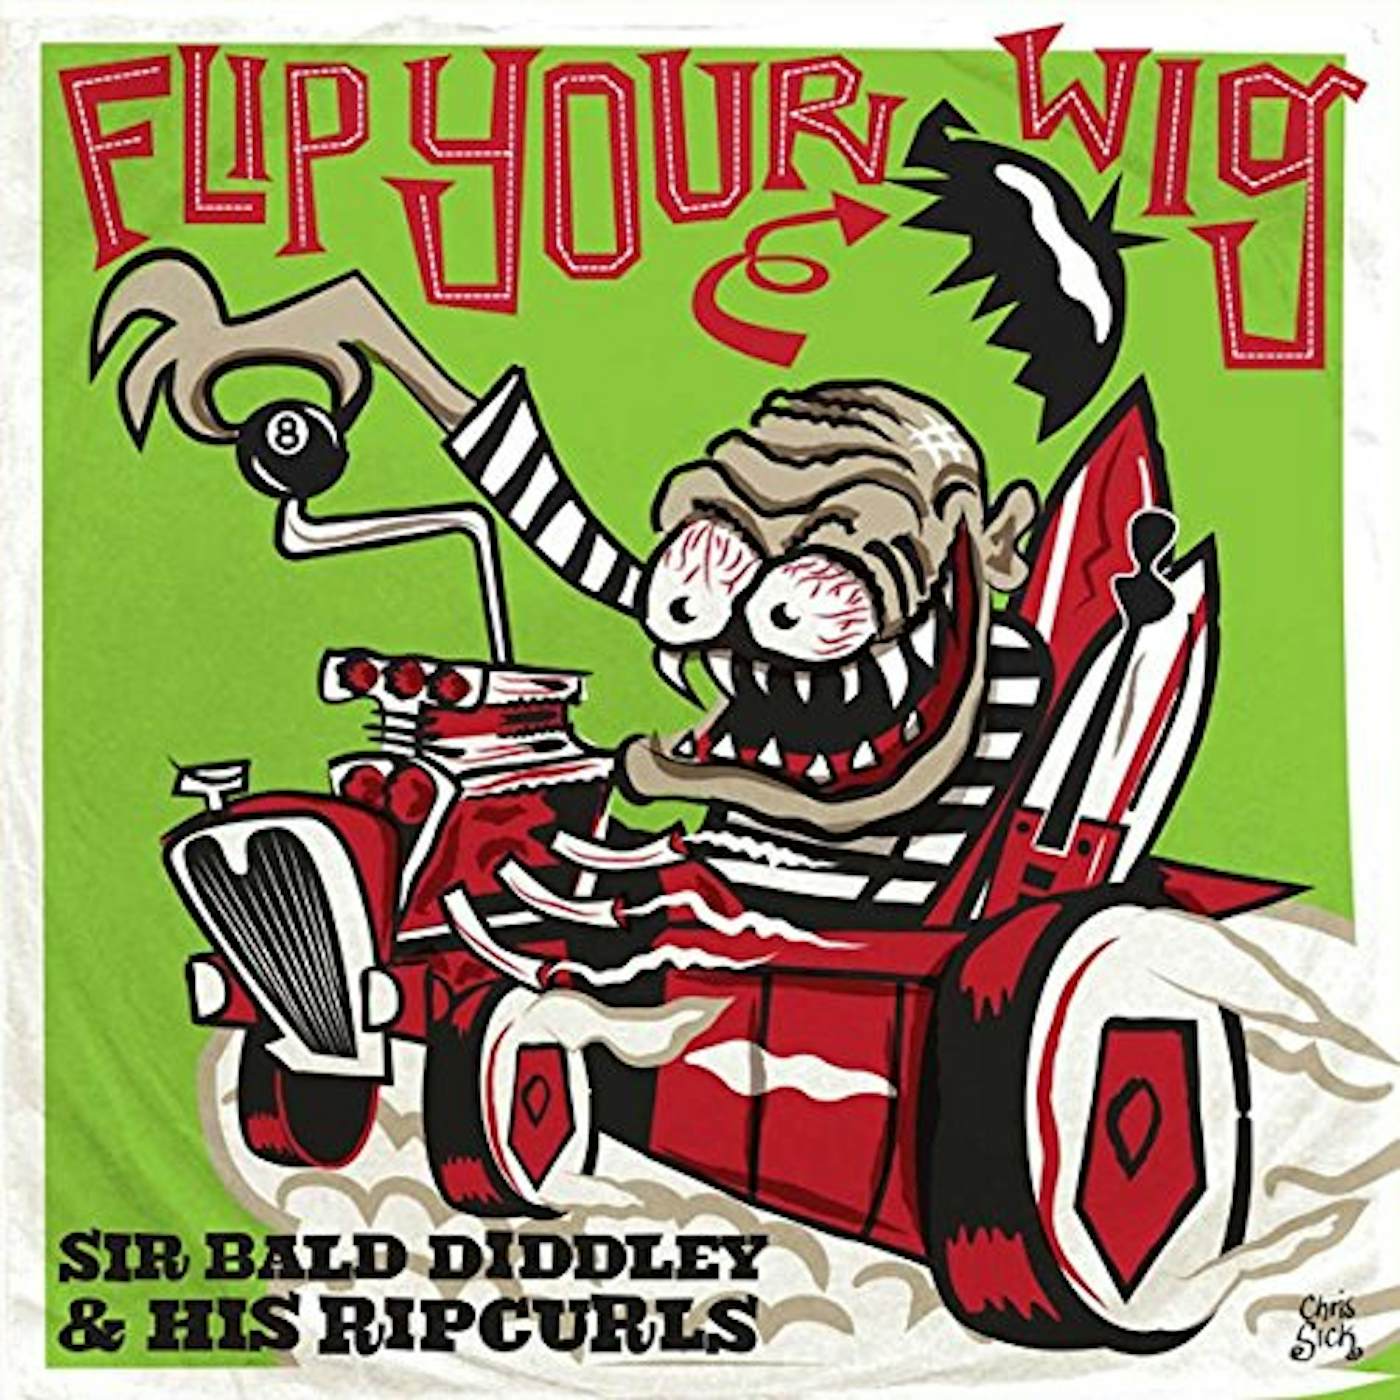 SIR BALD DIDDLEY AND HIS RIPCURLS FLIP YOUR WIG Vinyl Record